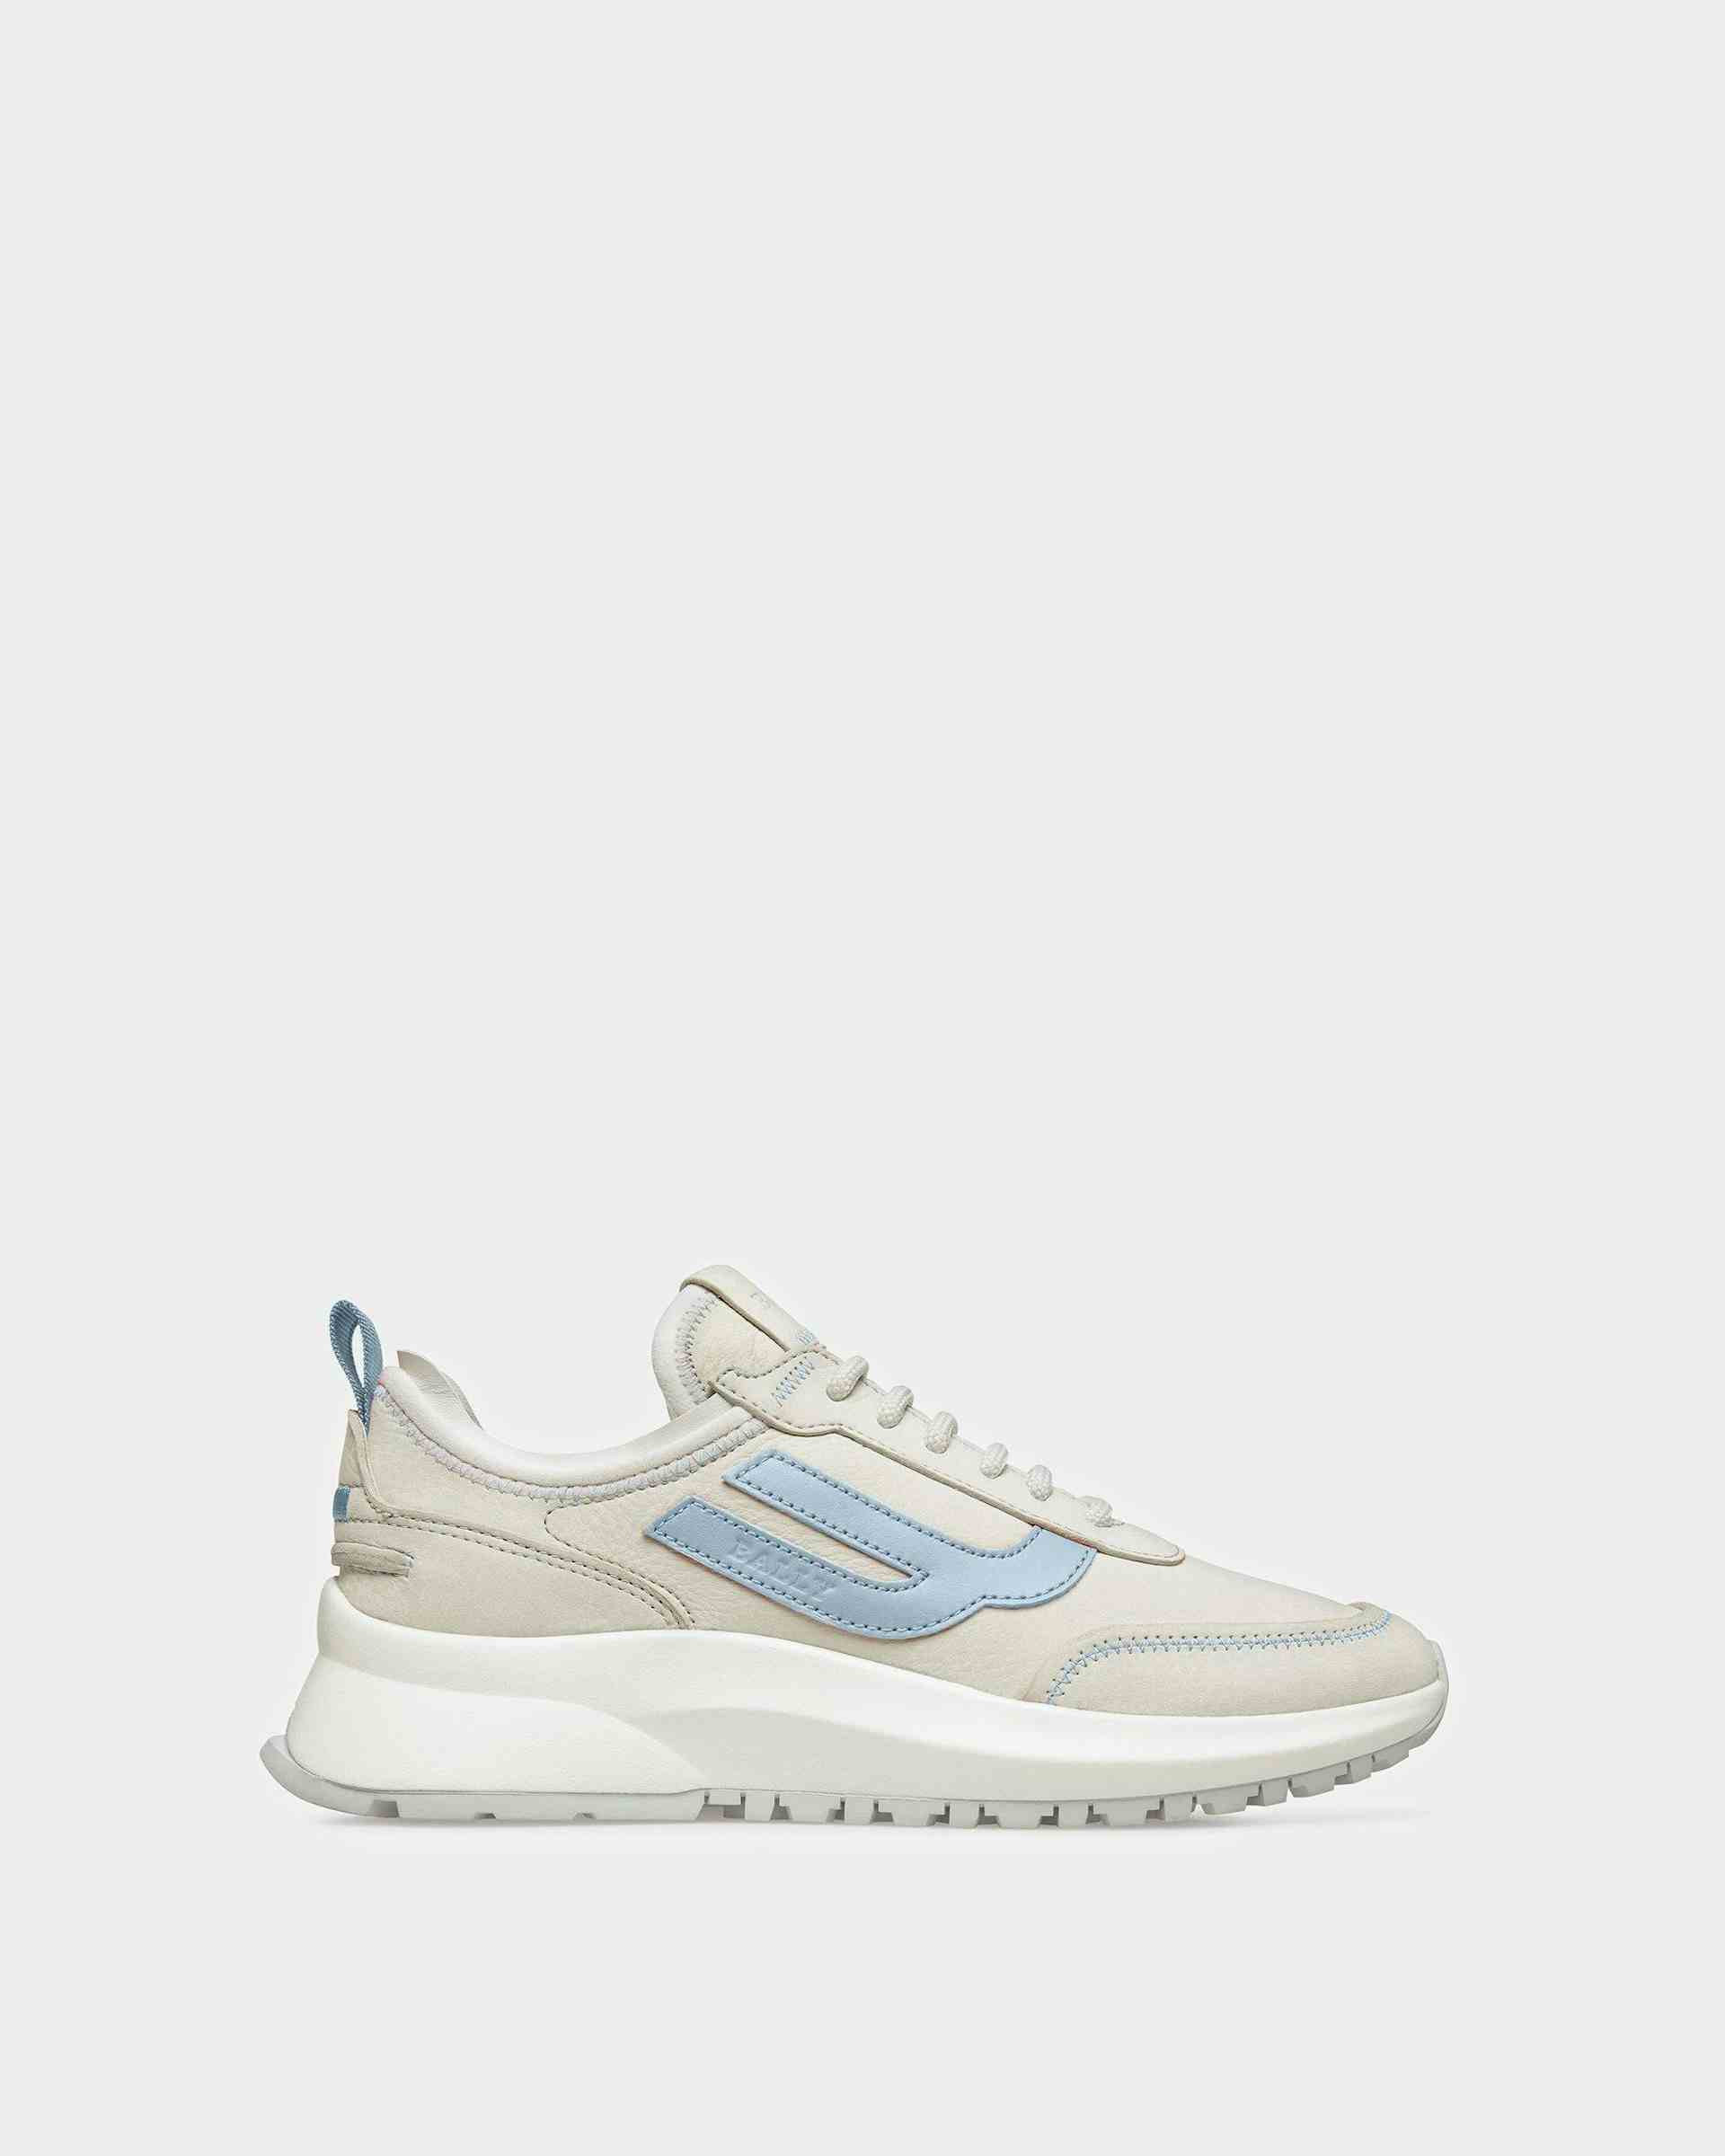 Darys Leather Sneakers In Dusty White And Light Blue - Women's - Bally